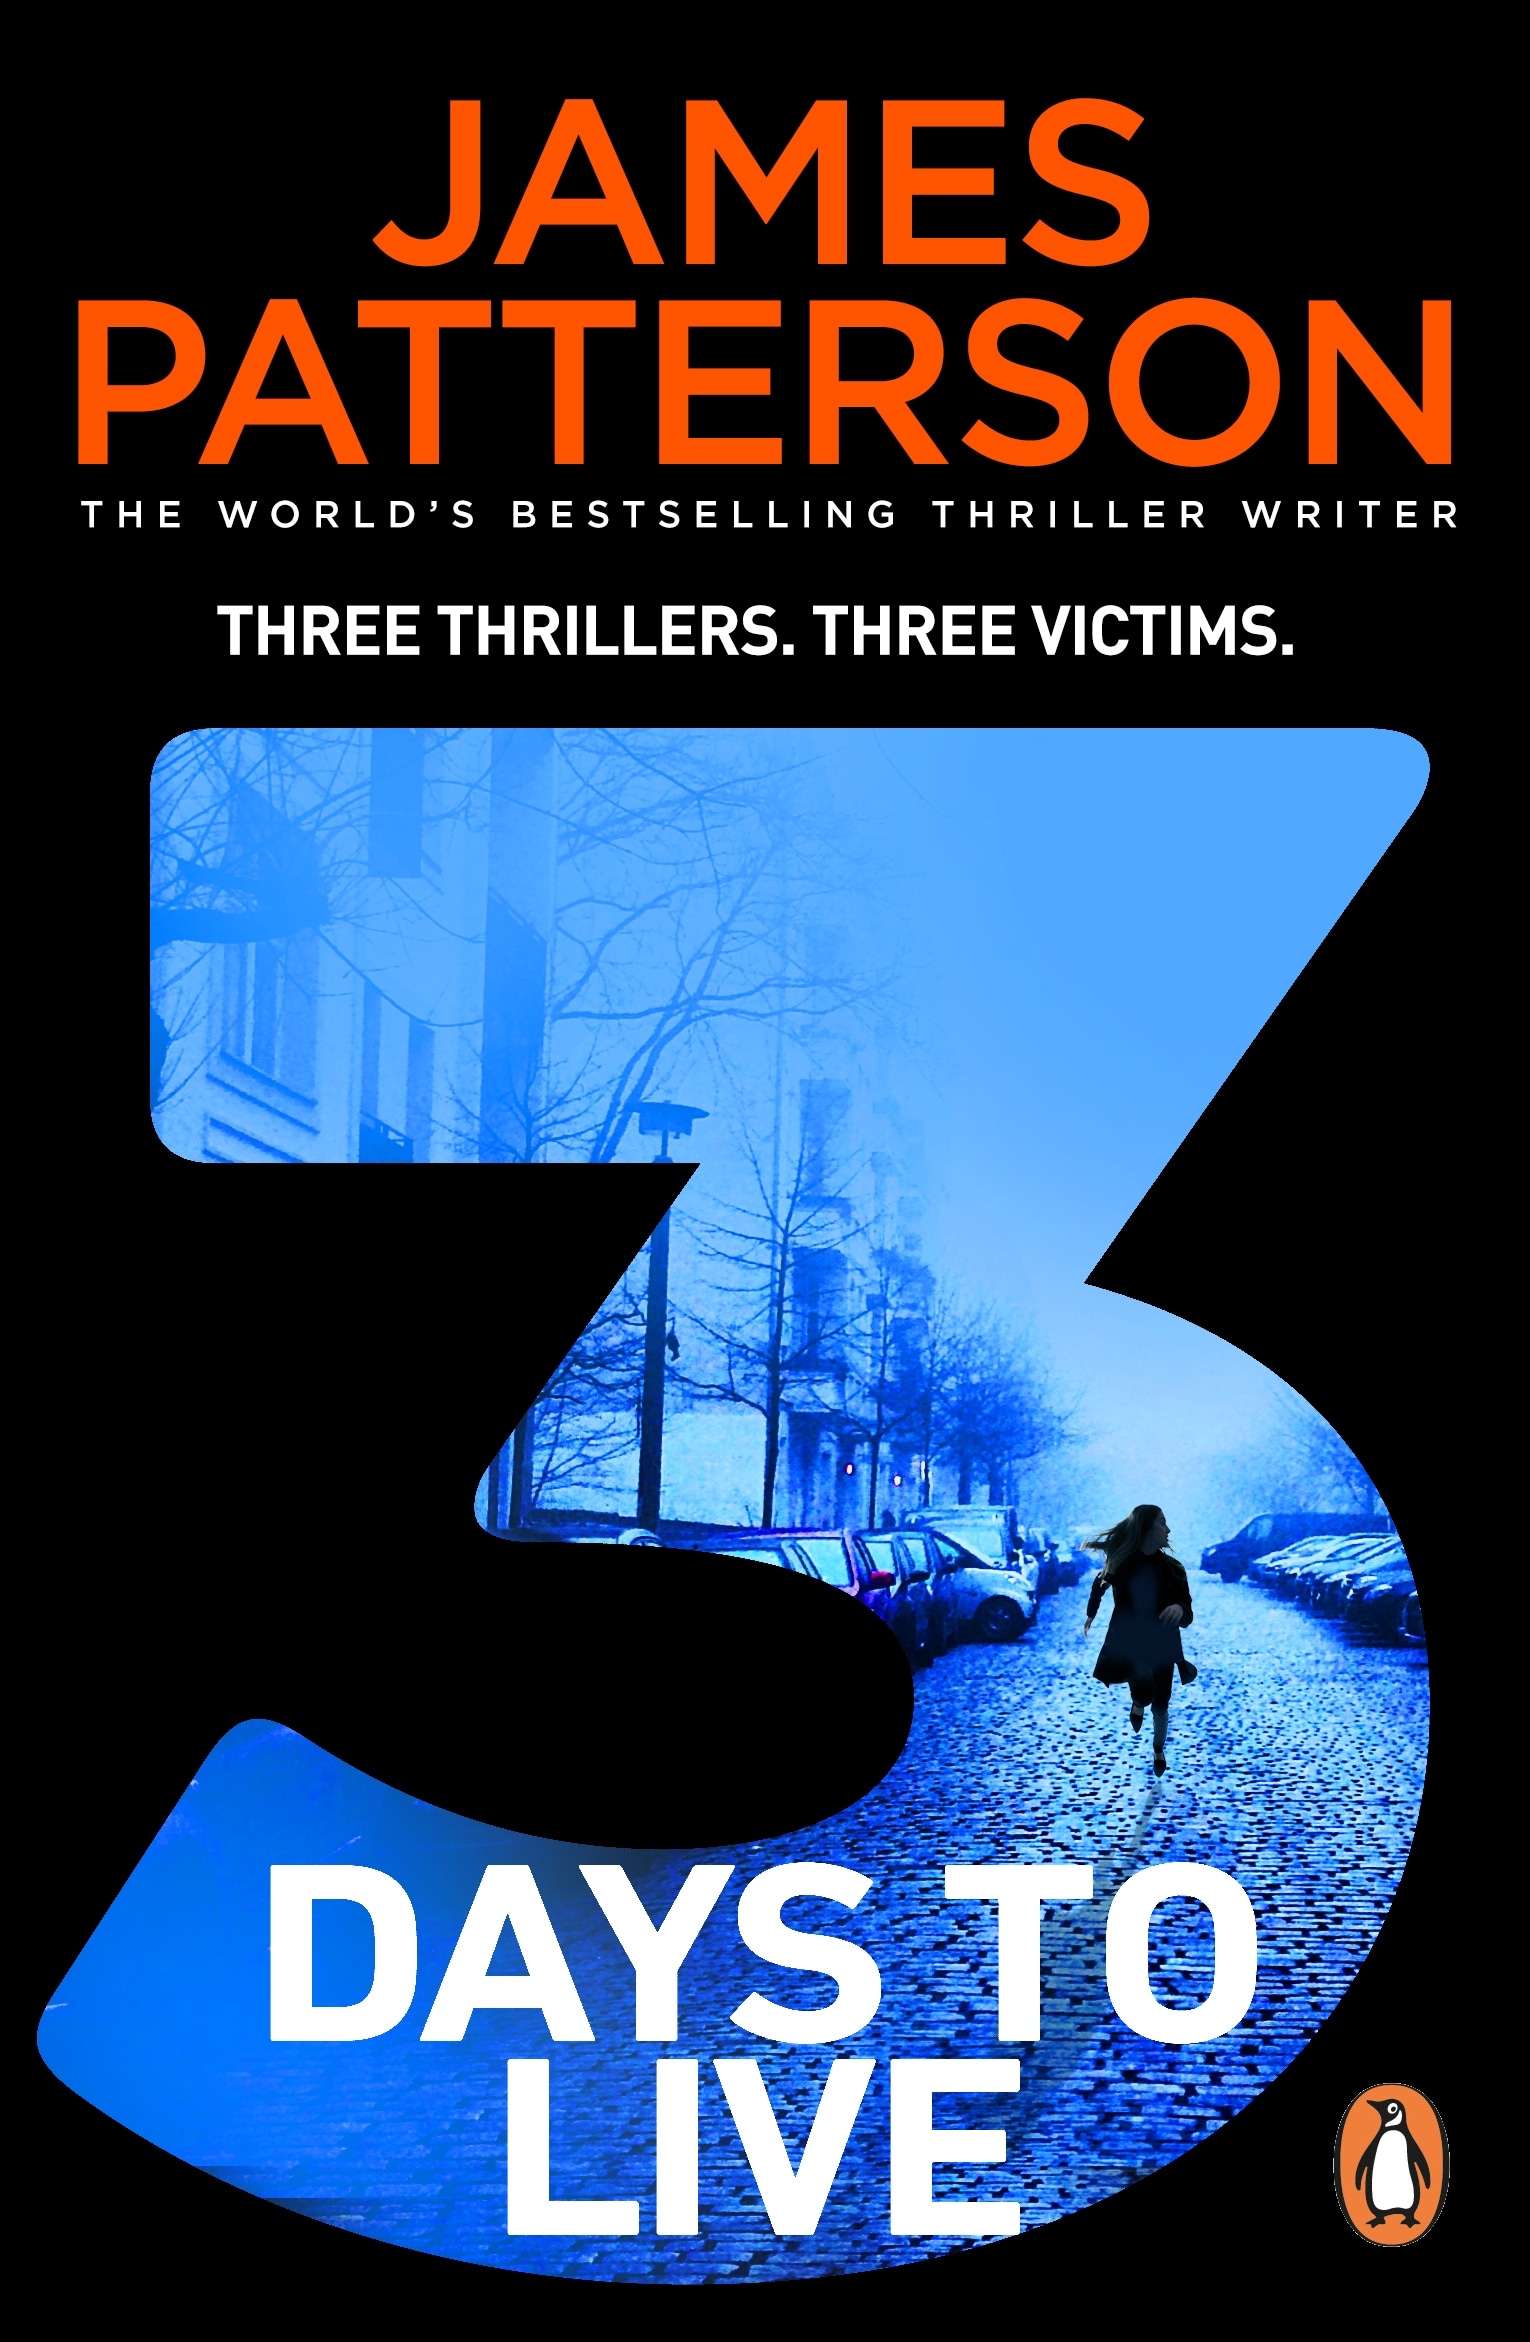 Book “3 Days to Live” by James Patterson — February 2, 2023